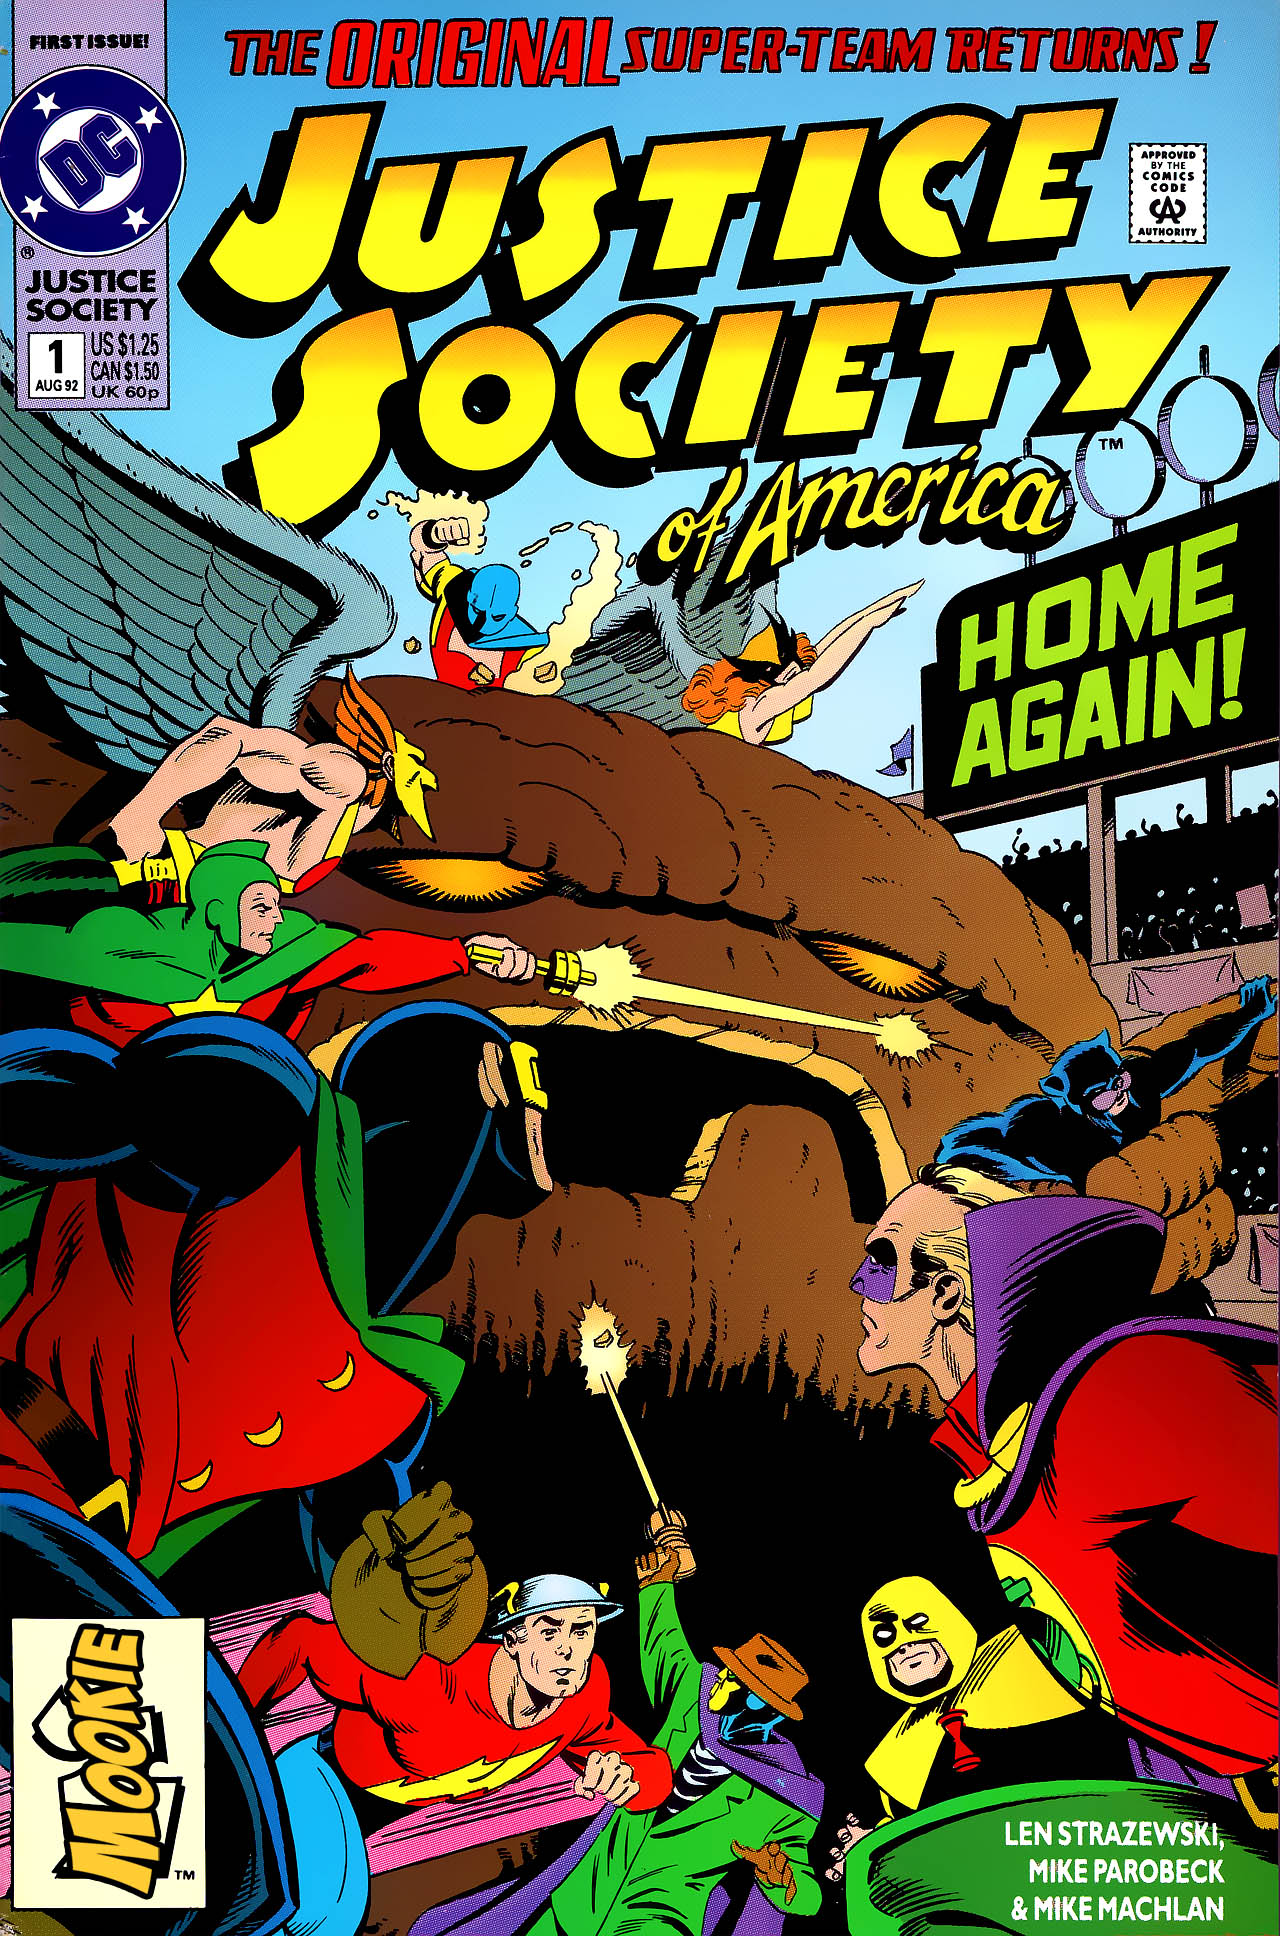 Read online Justice Society of America (1992) comic -  Issue #1 - 1